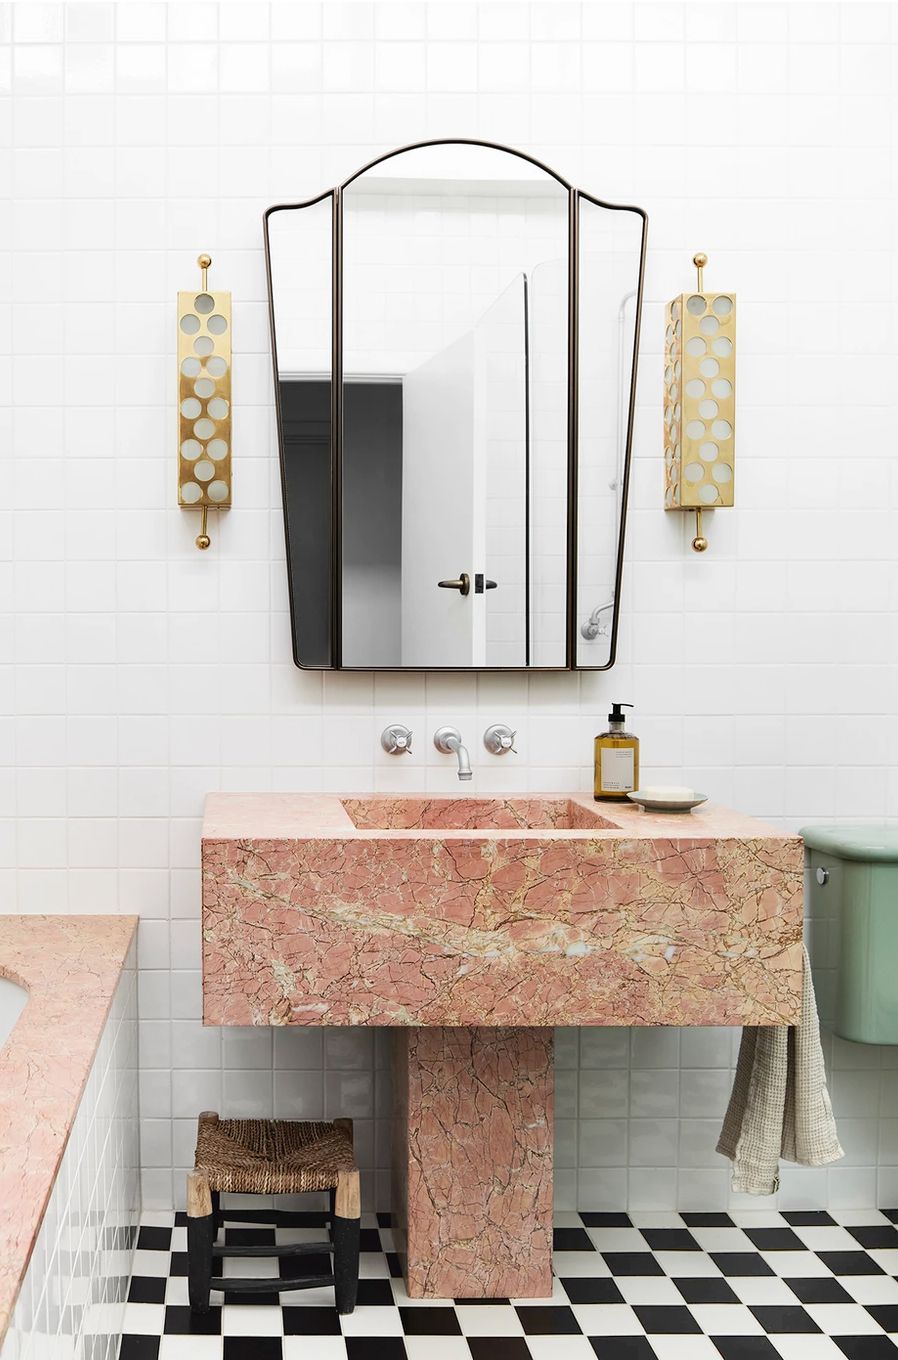 The 60 Coolest Bathroom Tile Ideas to Recreate in Your Home